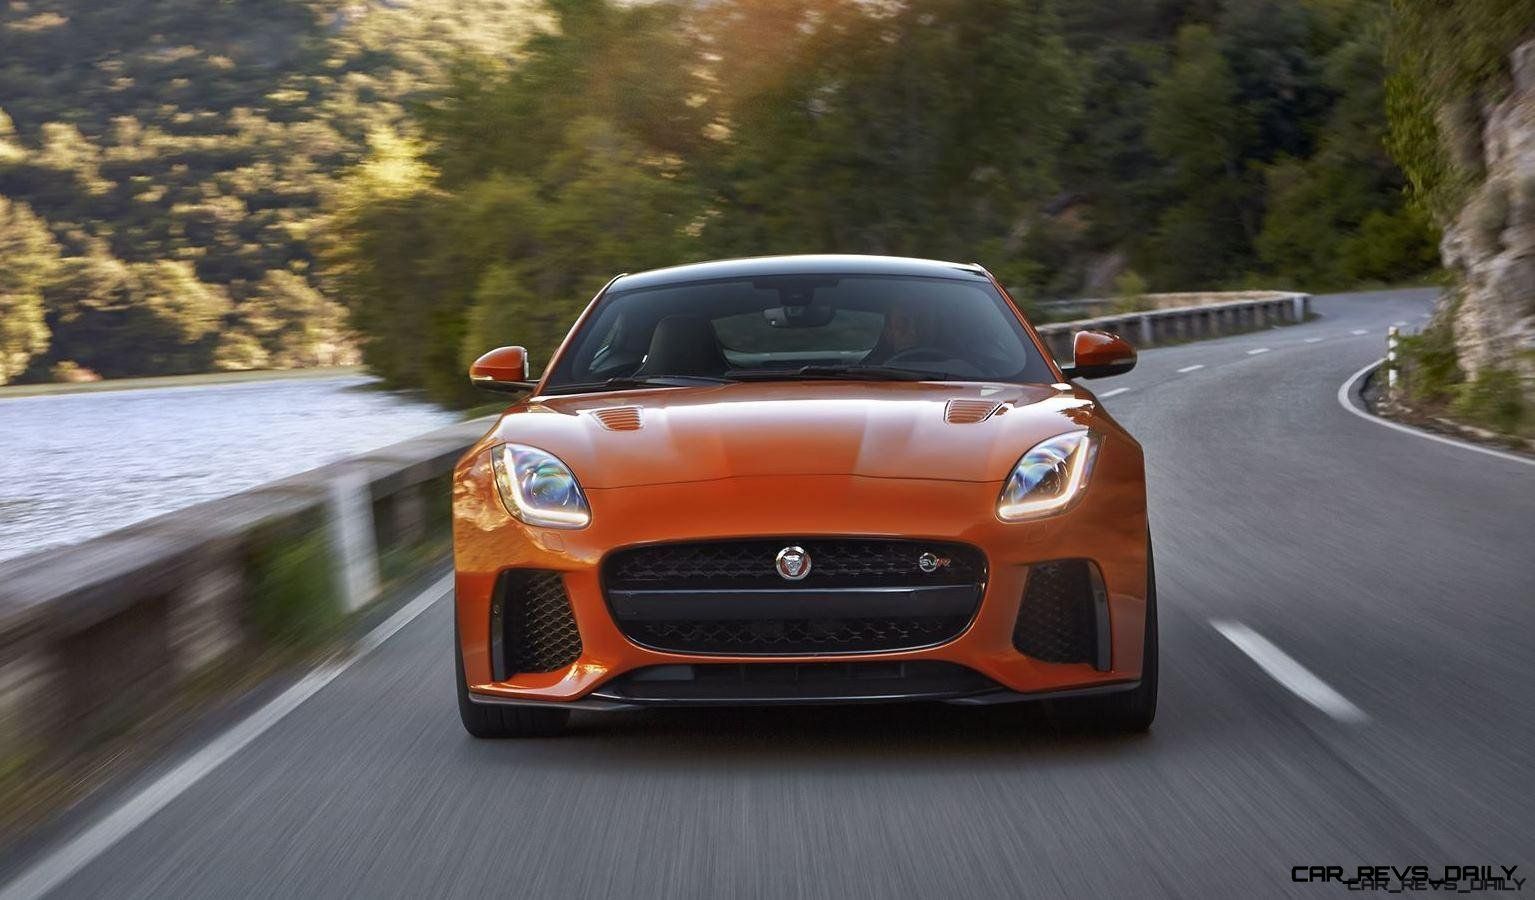 Off The Chain! 3.5s, 200MPH 2017 Jaguar F TYPE SVR New Image, Tech Specs And Pricing Revealed Car Revs Daily.com